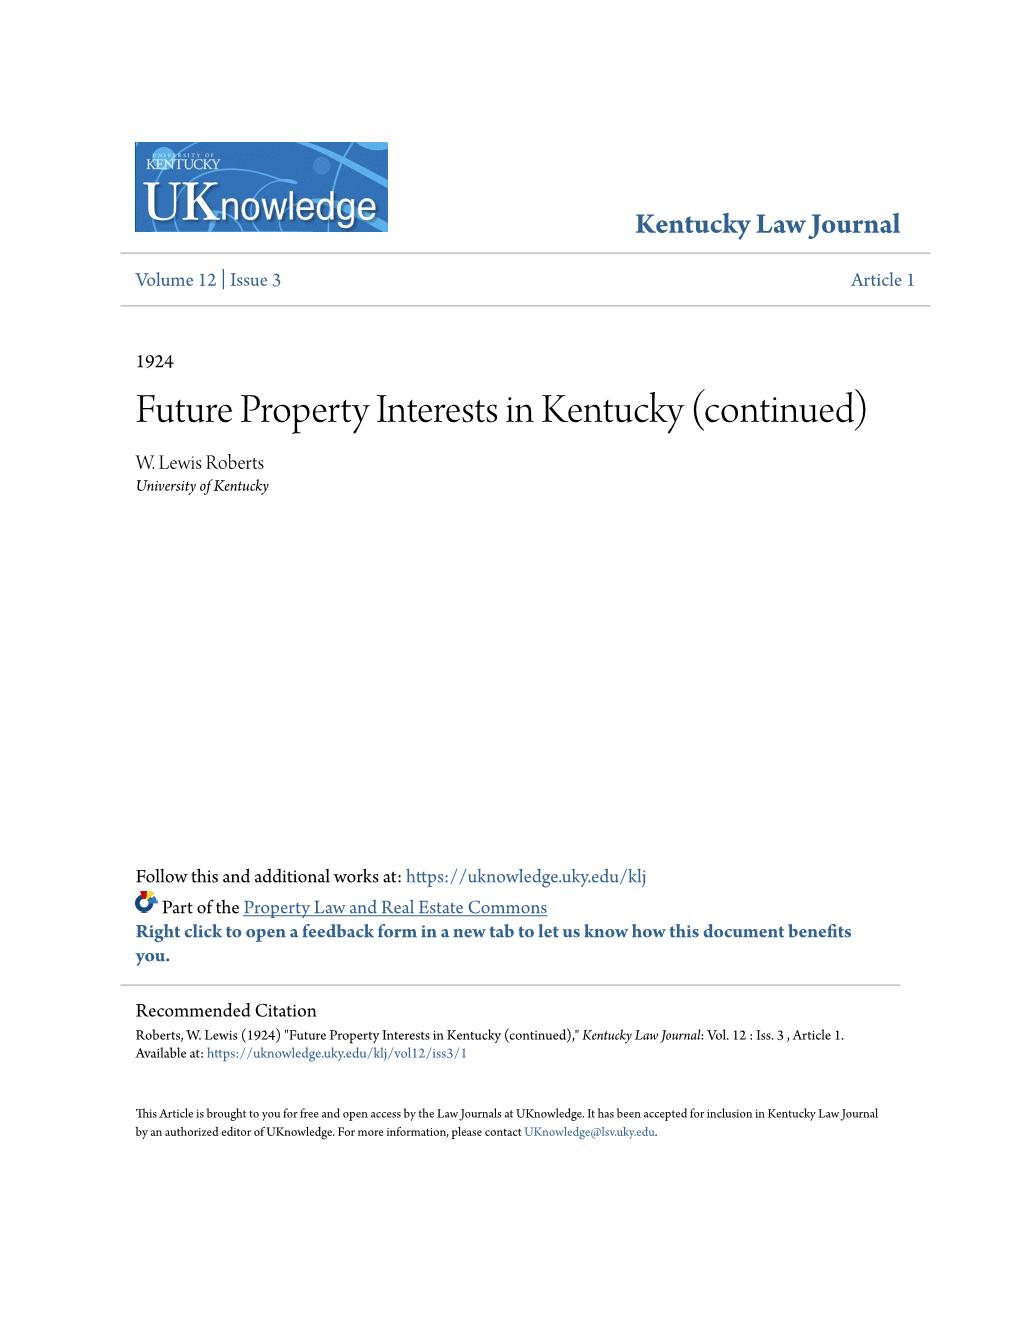 Future Property Interests in Kentucky (Continued) W